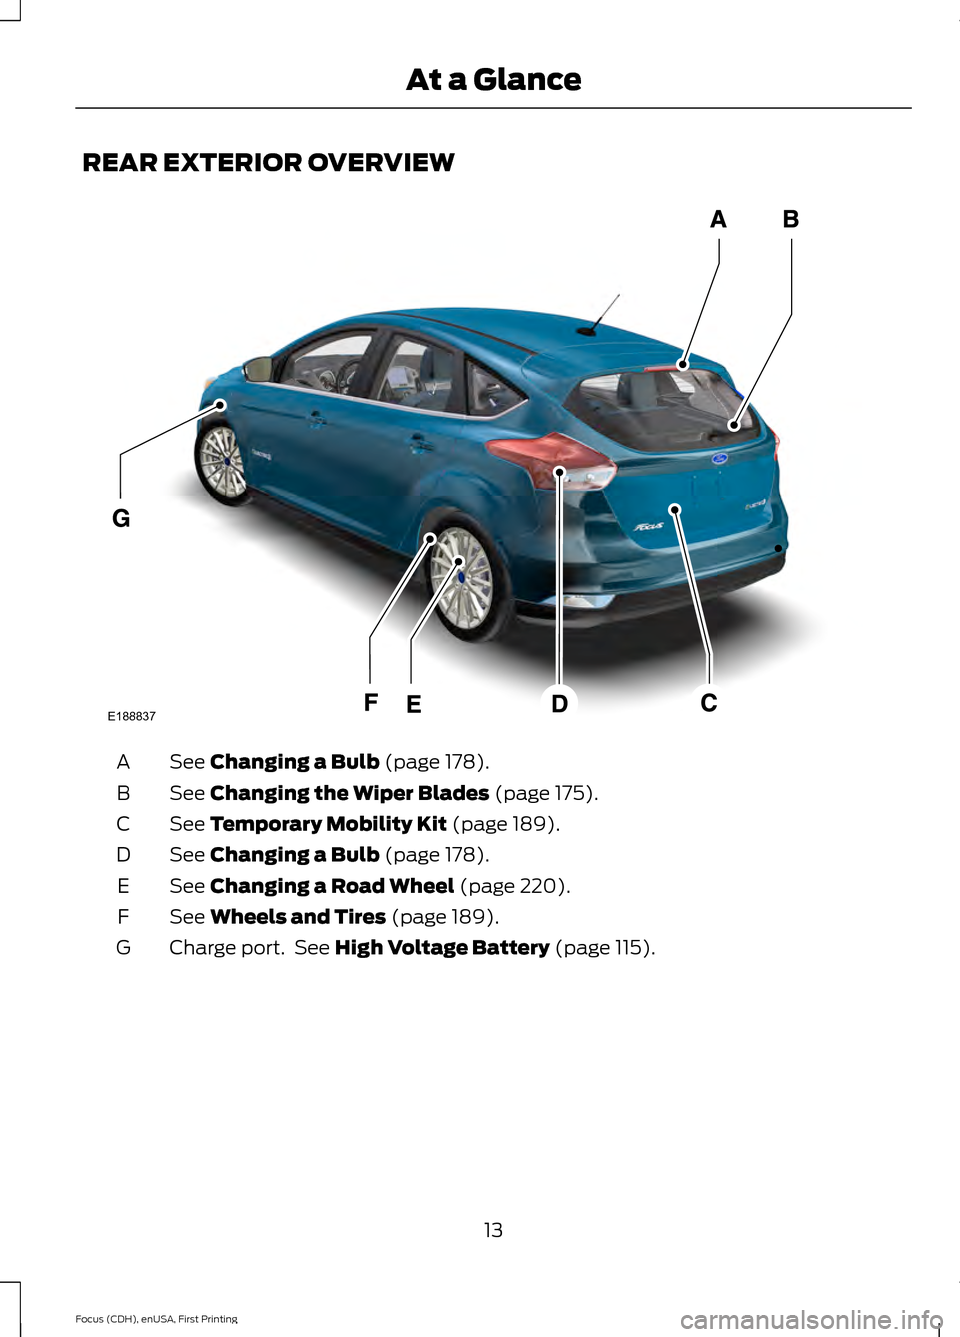 FORD FOCUS ELECTRIC 2015 3.G Owners Manual REAR EXTERIOR OVERVIEW
See Changing a Bulb (page 178).
A
See 
Changing the Wiper Blades (page 175).
B
See 
Temporary Mobility Kit (page 189).
C
See 
Changing a Bulb (page 178).
D
See 
Changing a Road 